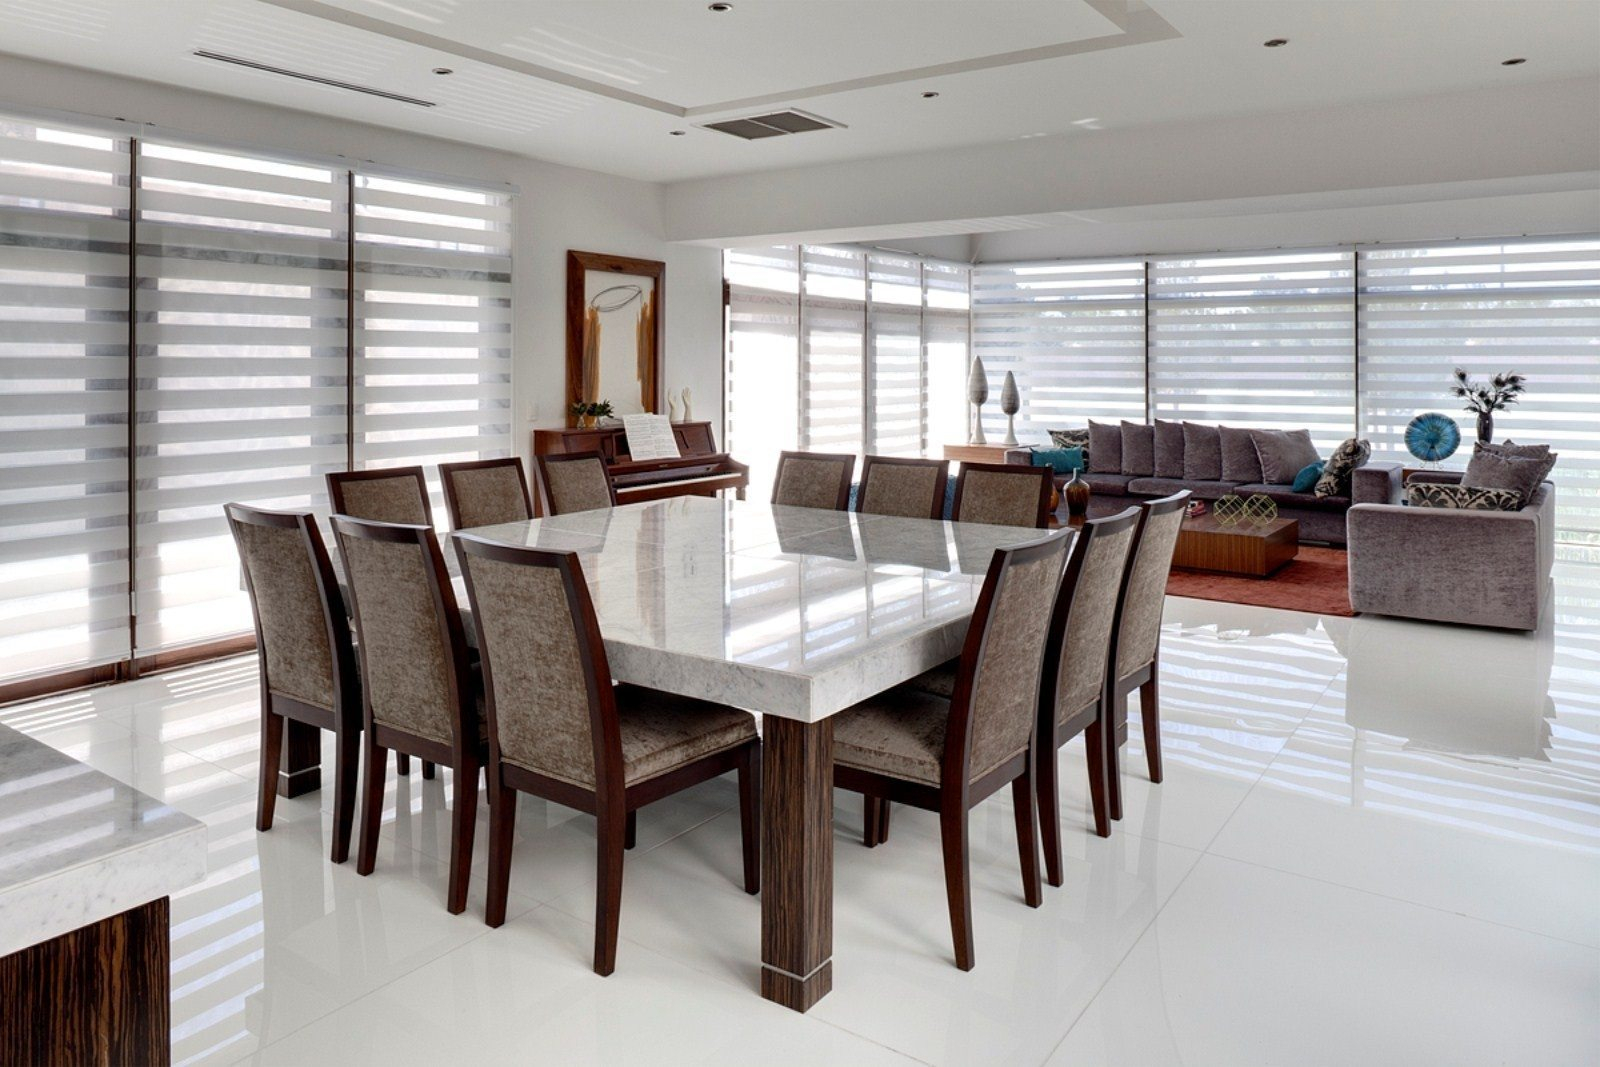 12 Seater Dining Room Tables South Africa • Faucet Ideas Site